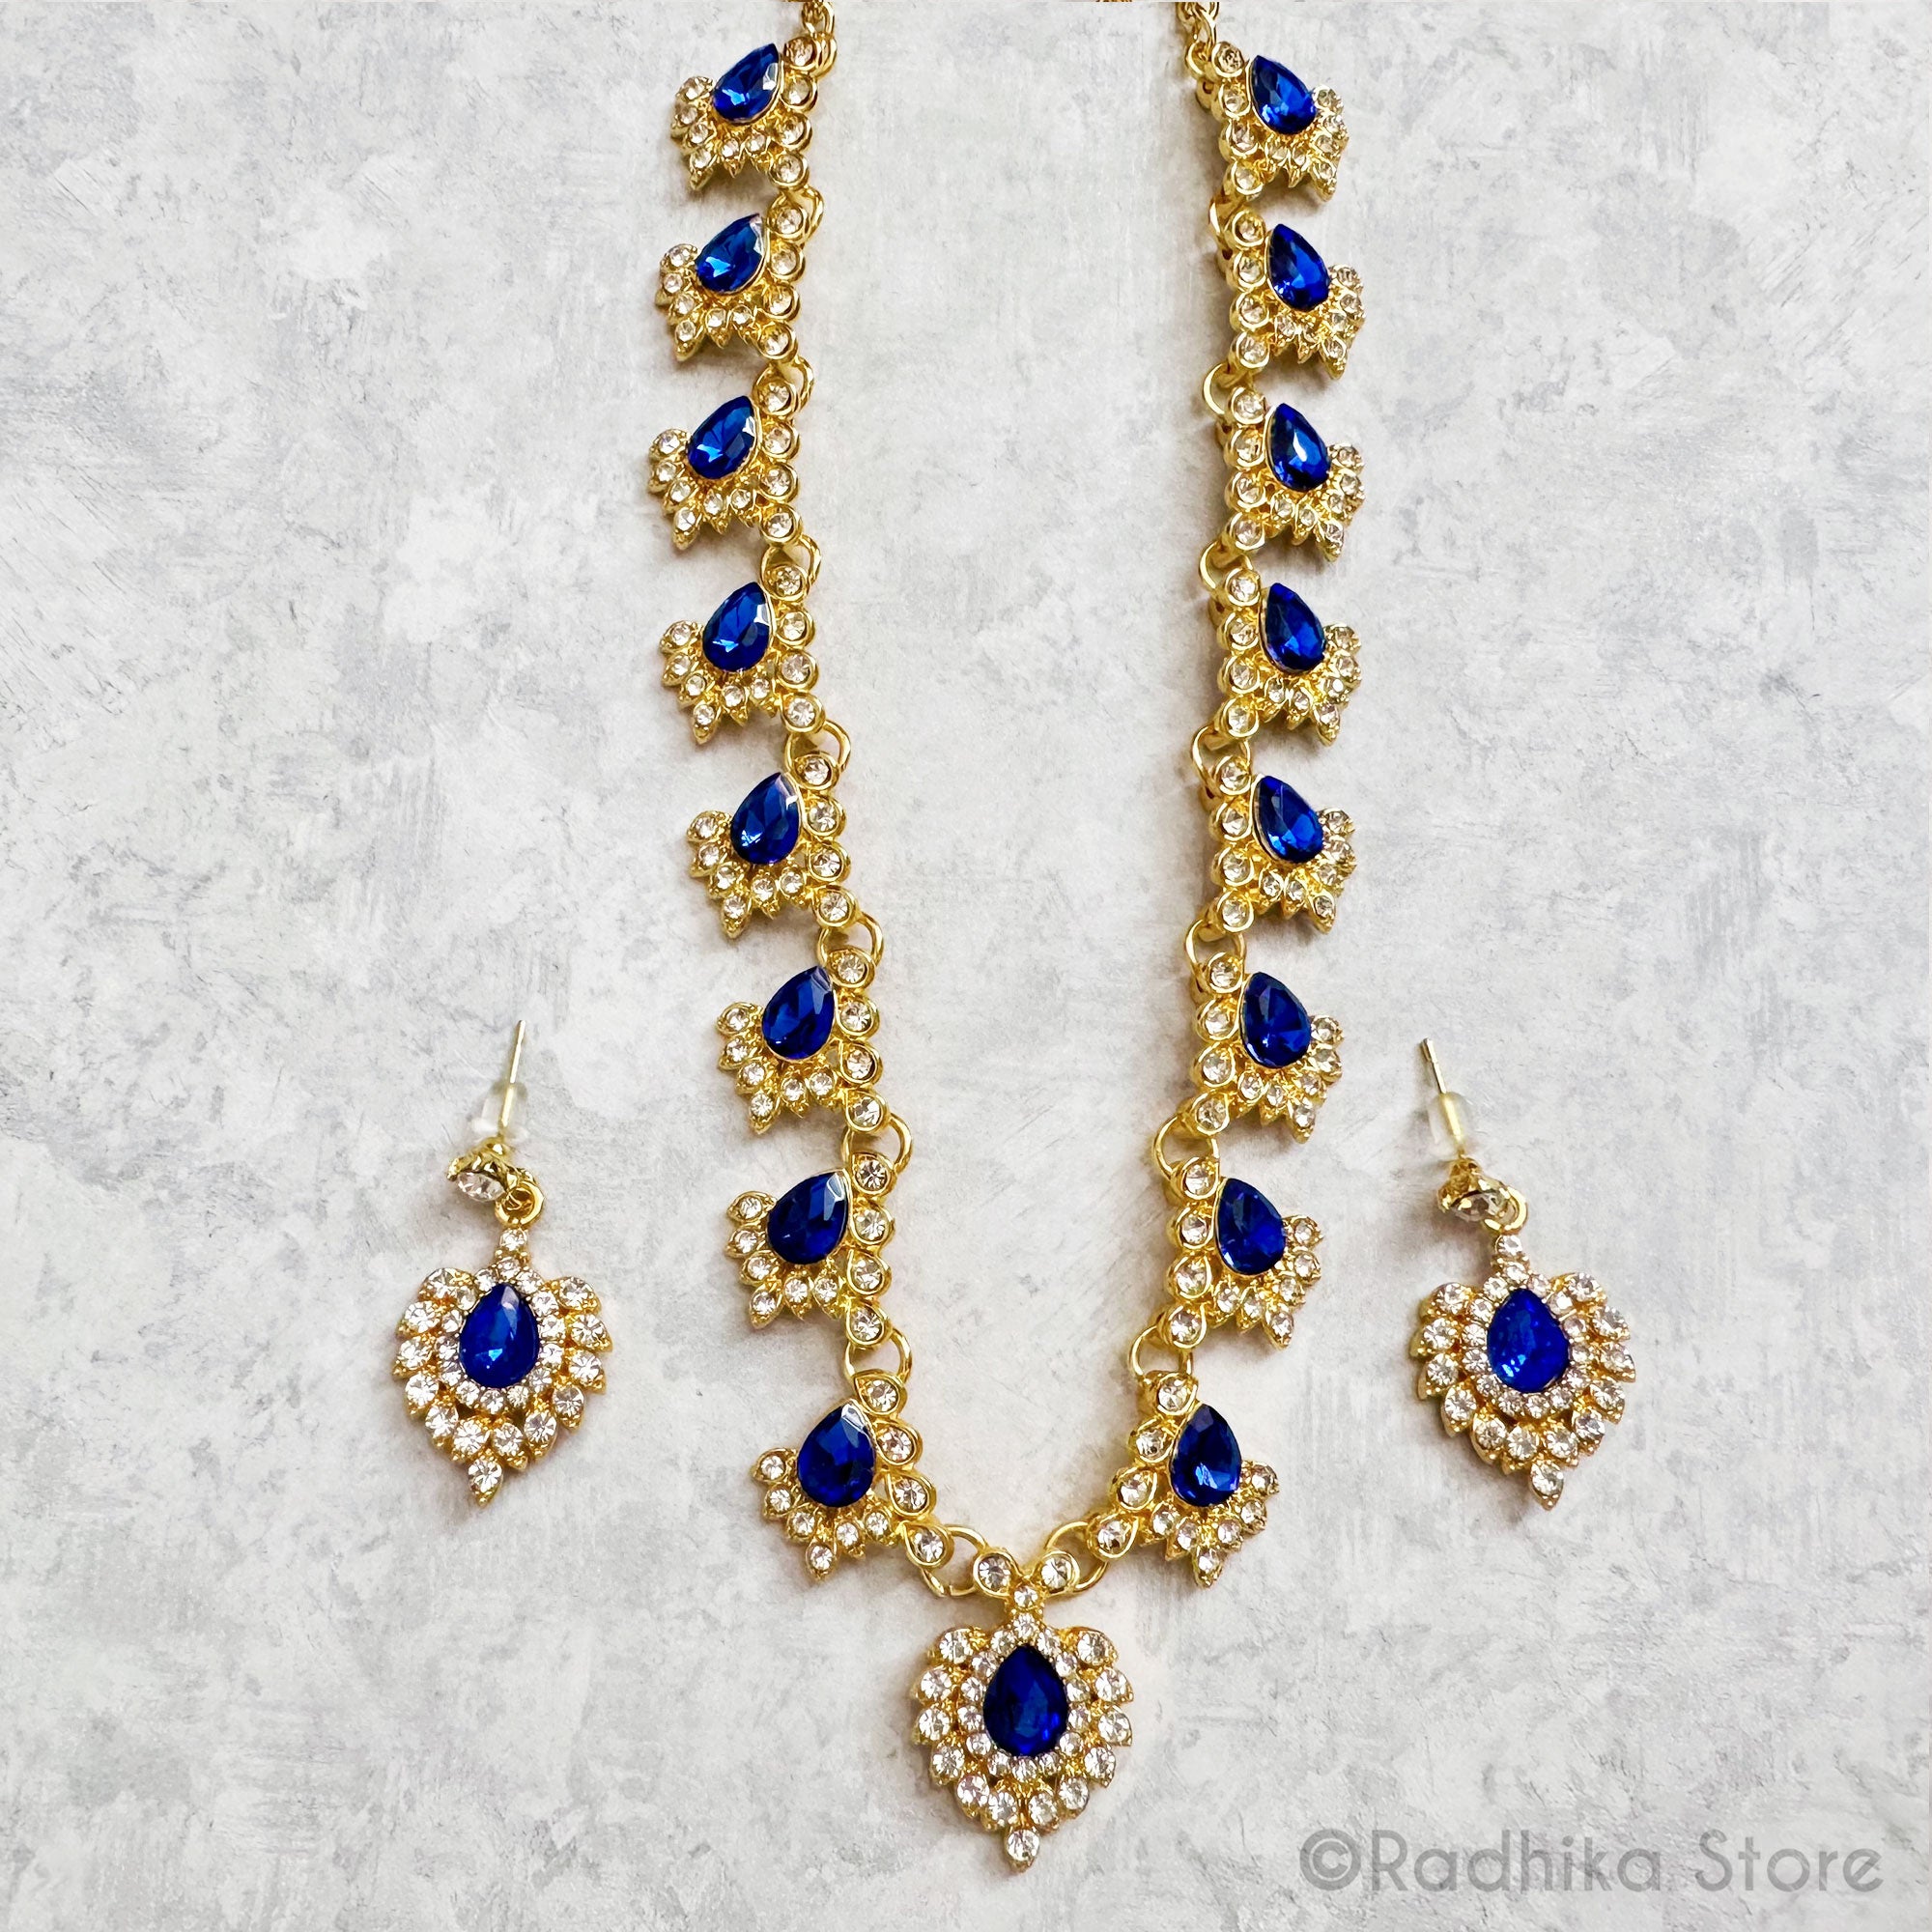 Jeweled Peacock Plumes  Deity Necklace And Earring Set